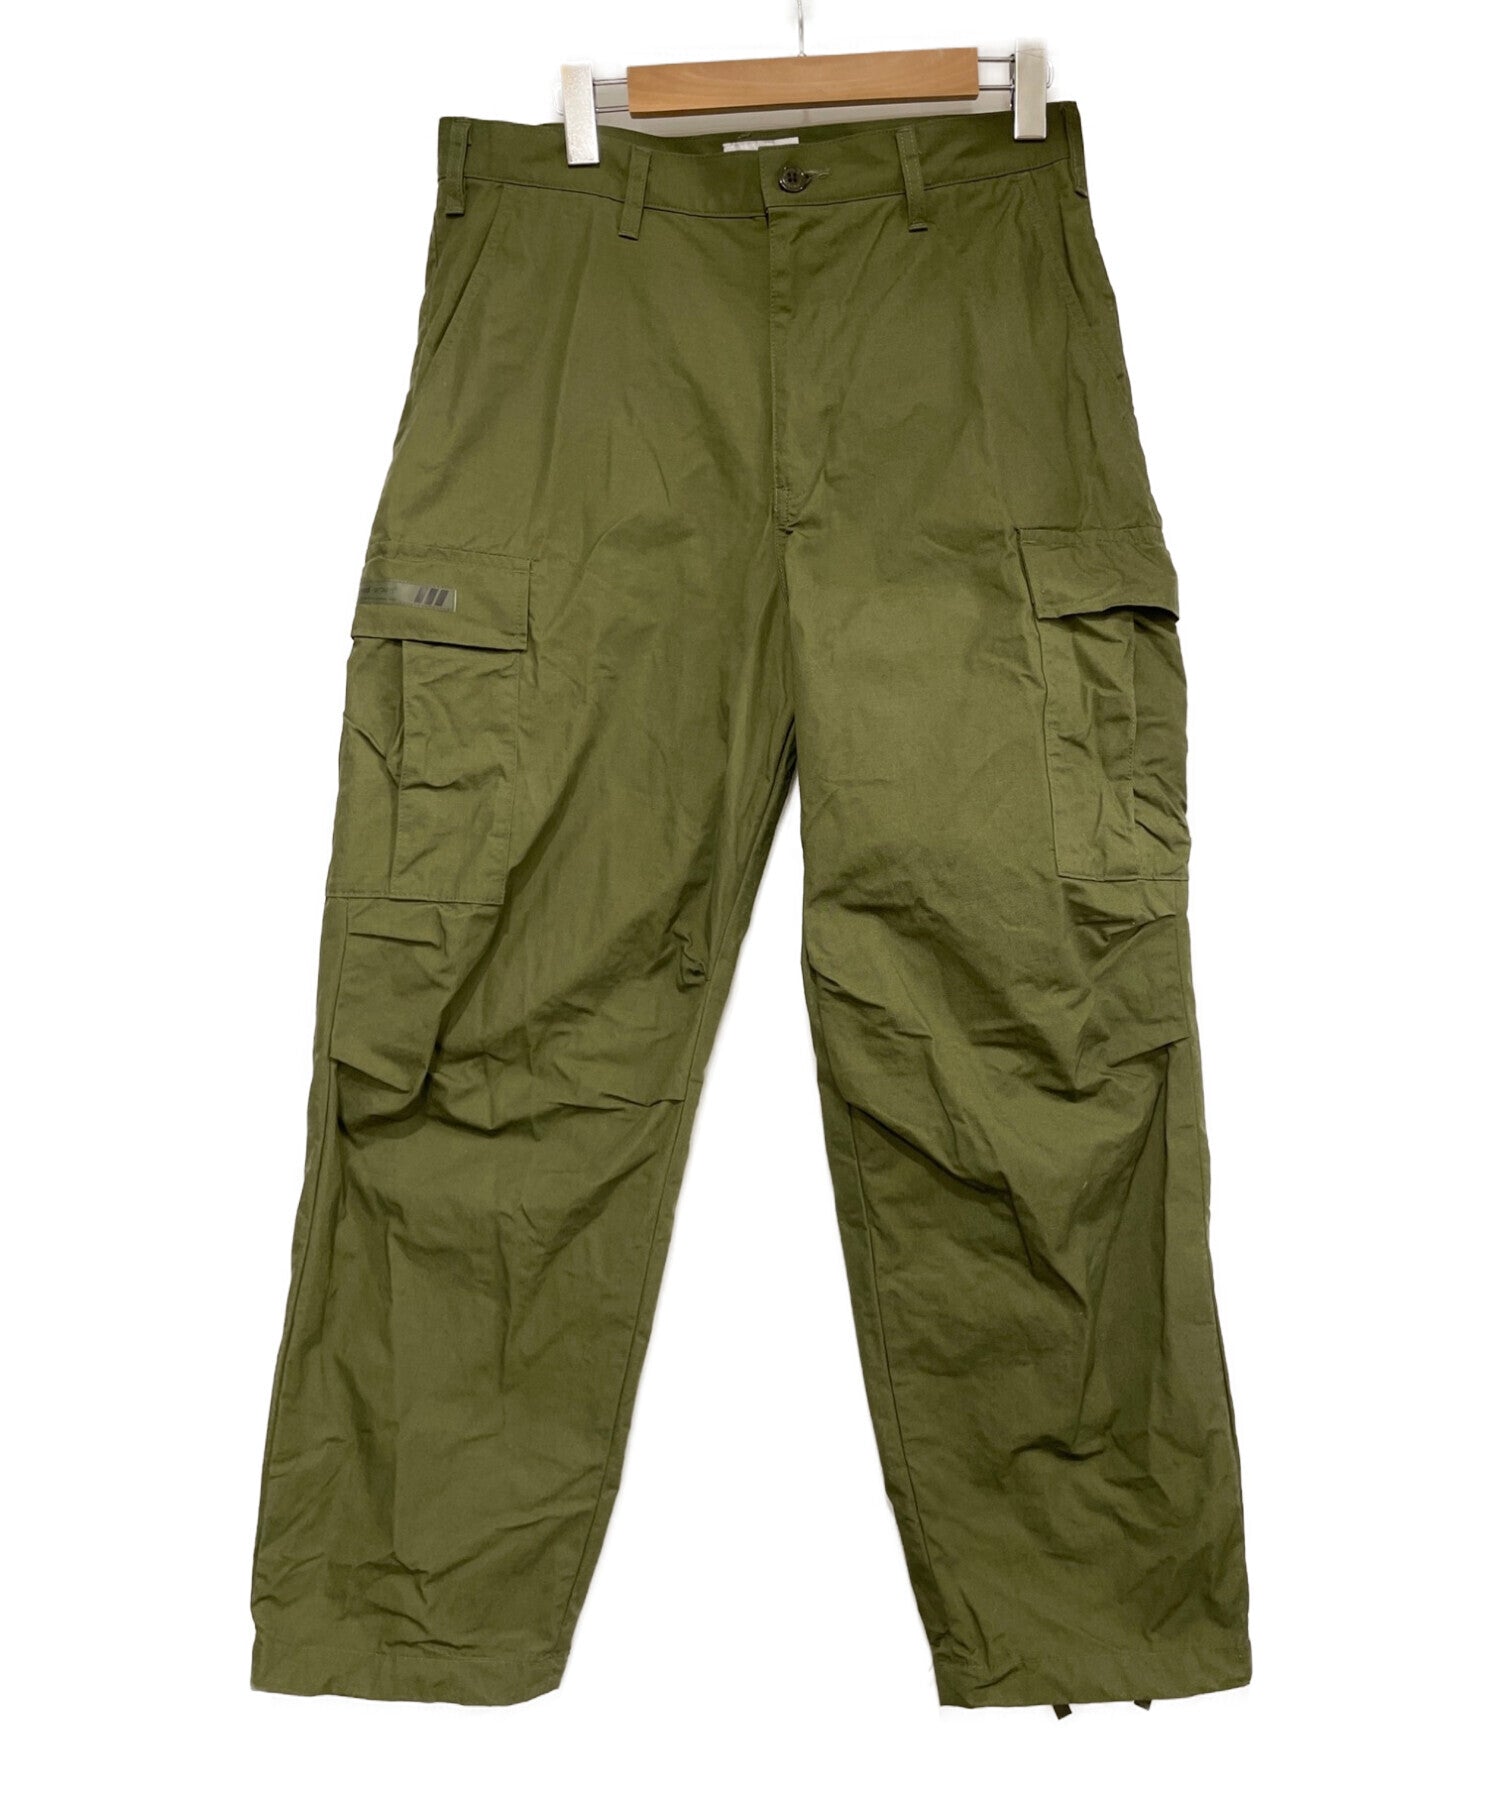 Pre-owned] WTAPS JUNGLE STOCK TROUSERS 222wvdt-ptm07 | Archive Factory